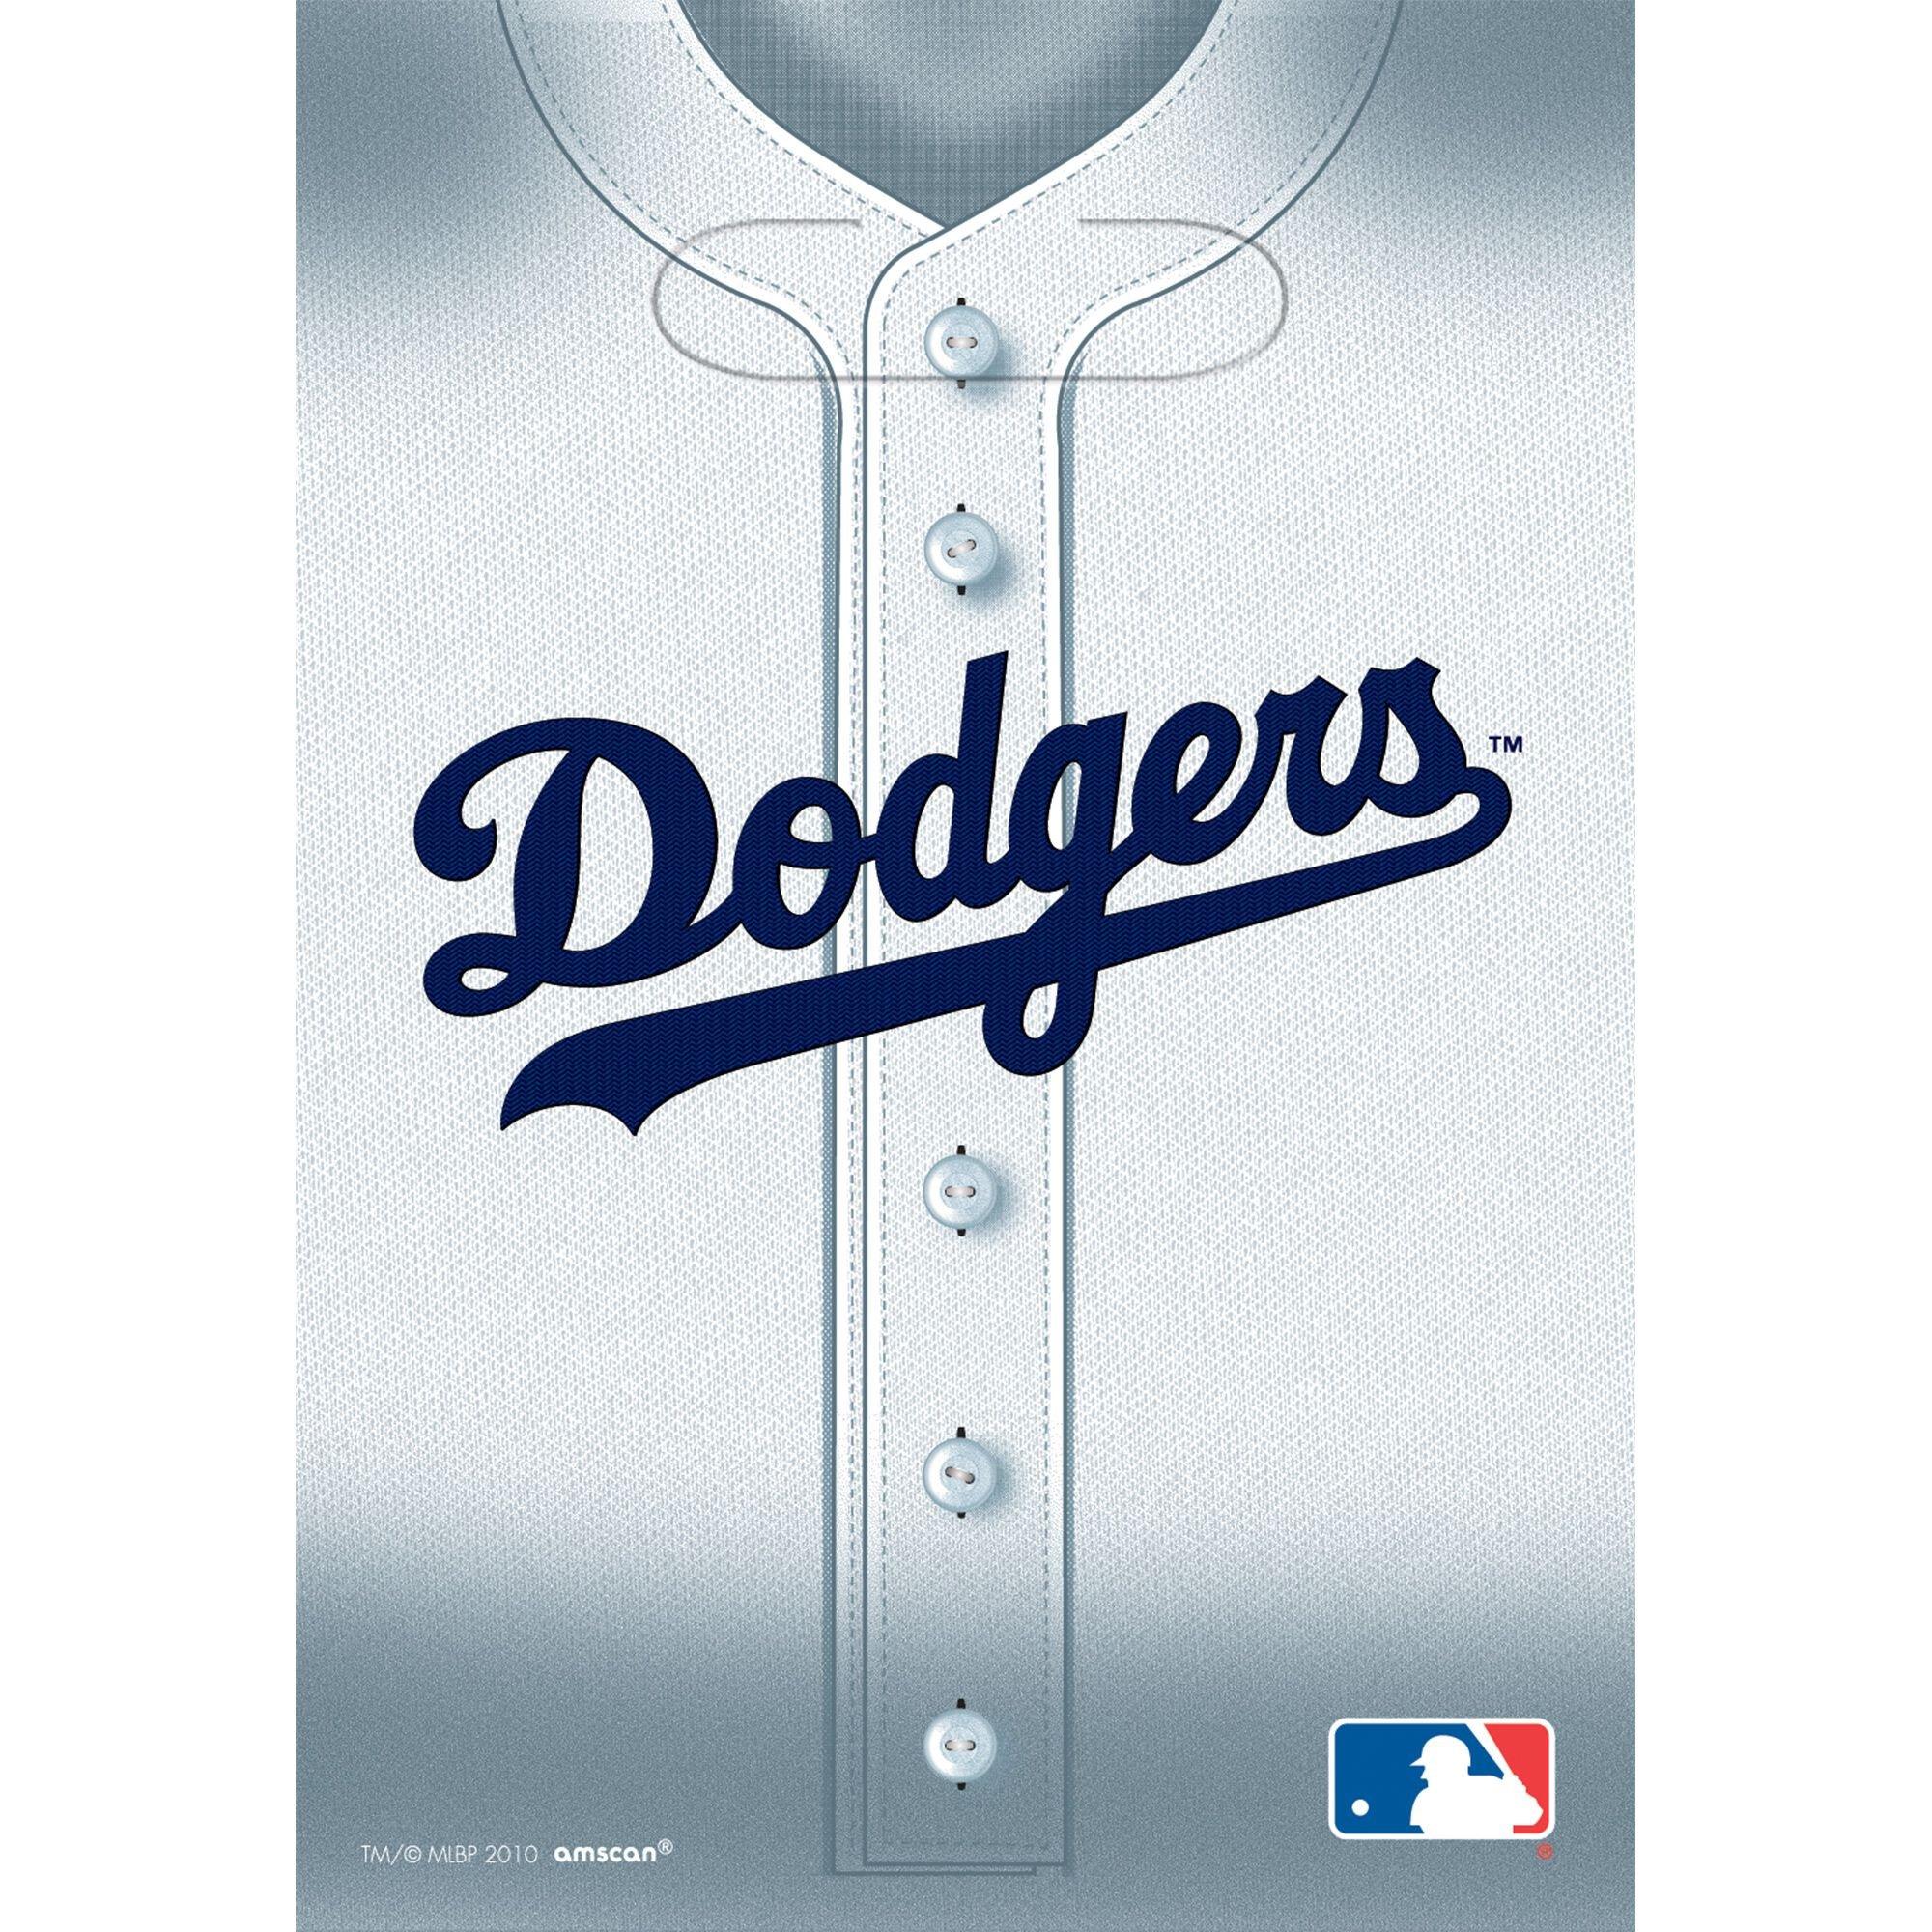 Los Angeles Dodgers on X: Join us on 8/24 for @Lakers Night at Dodger  Stadium! Purchase a special ticket pack to get this exclusive reversible  jersey. Get your tickets now at